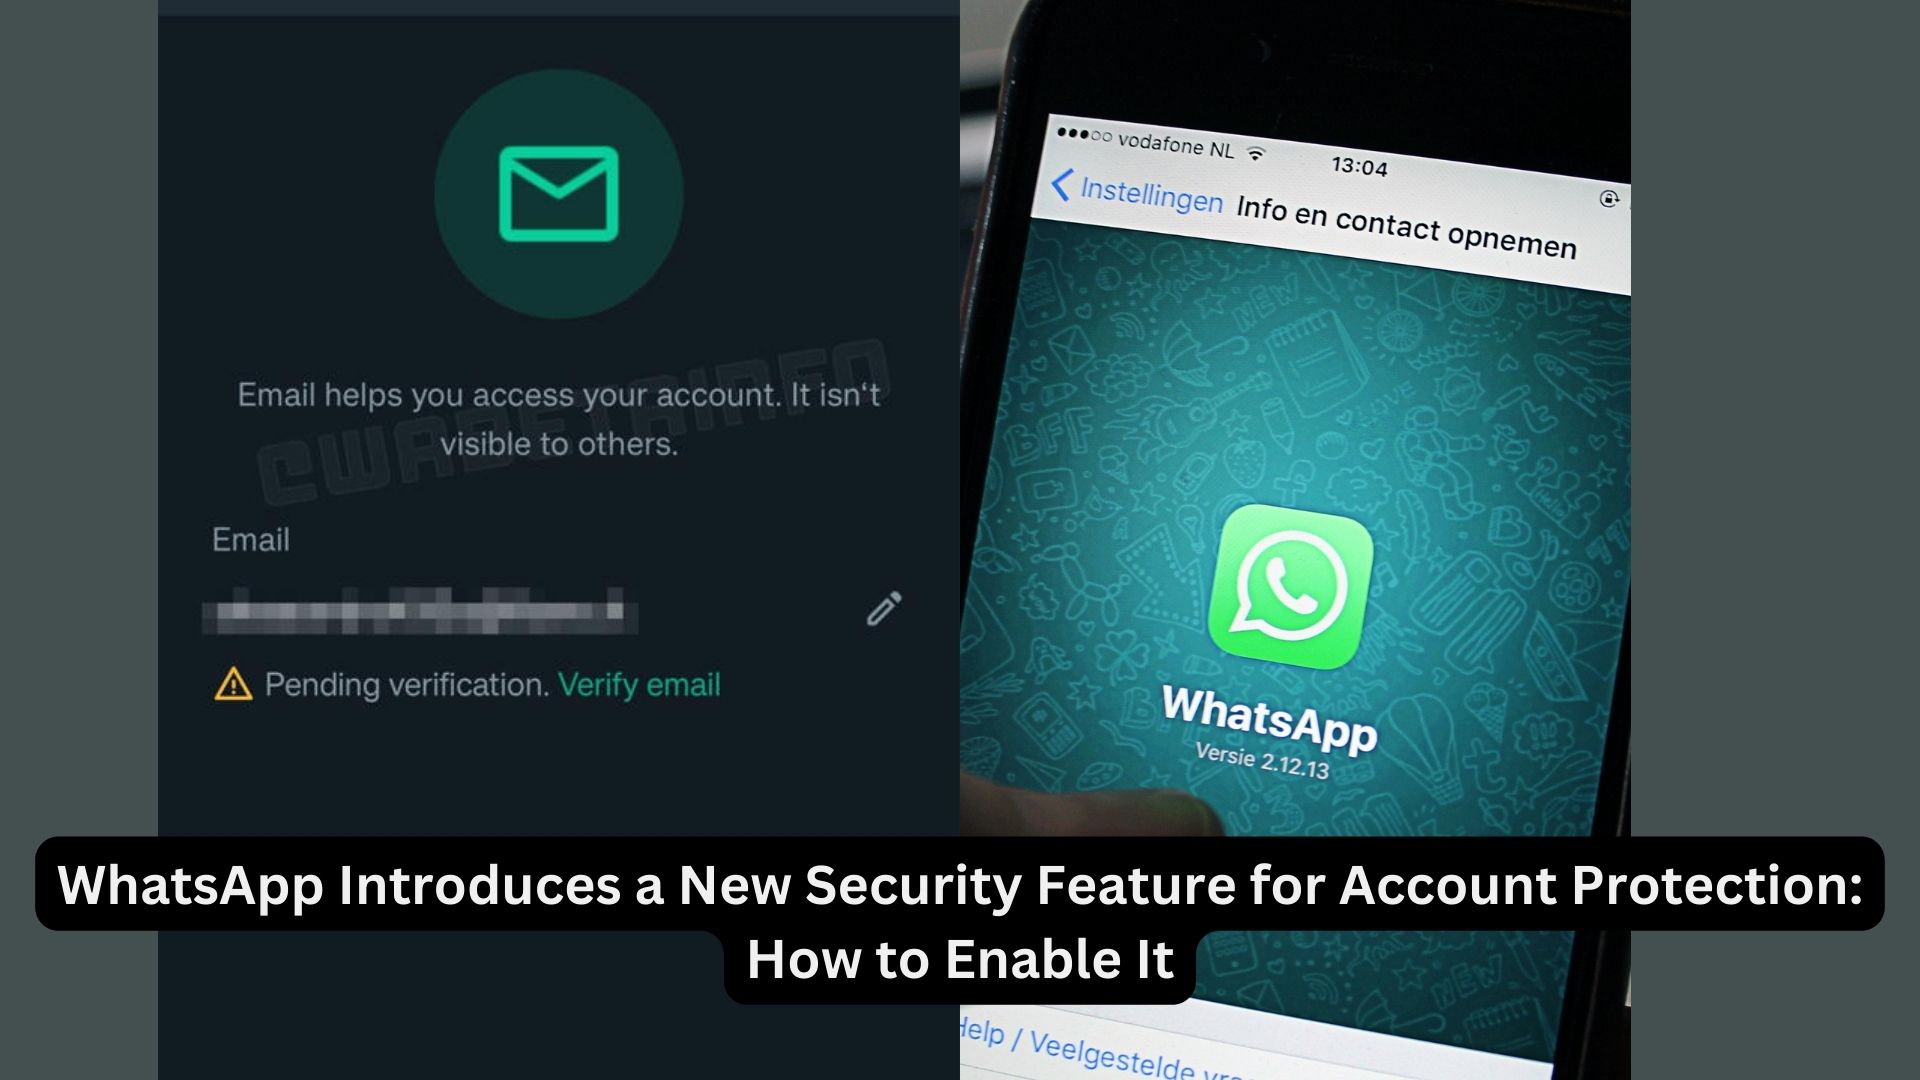 WhatsApp Introduces a New Security Feature for Account Protection: How to Enable It